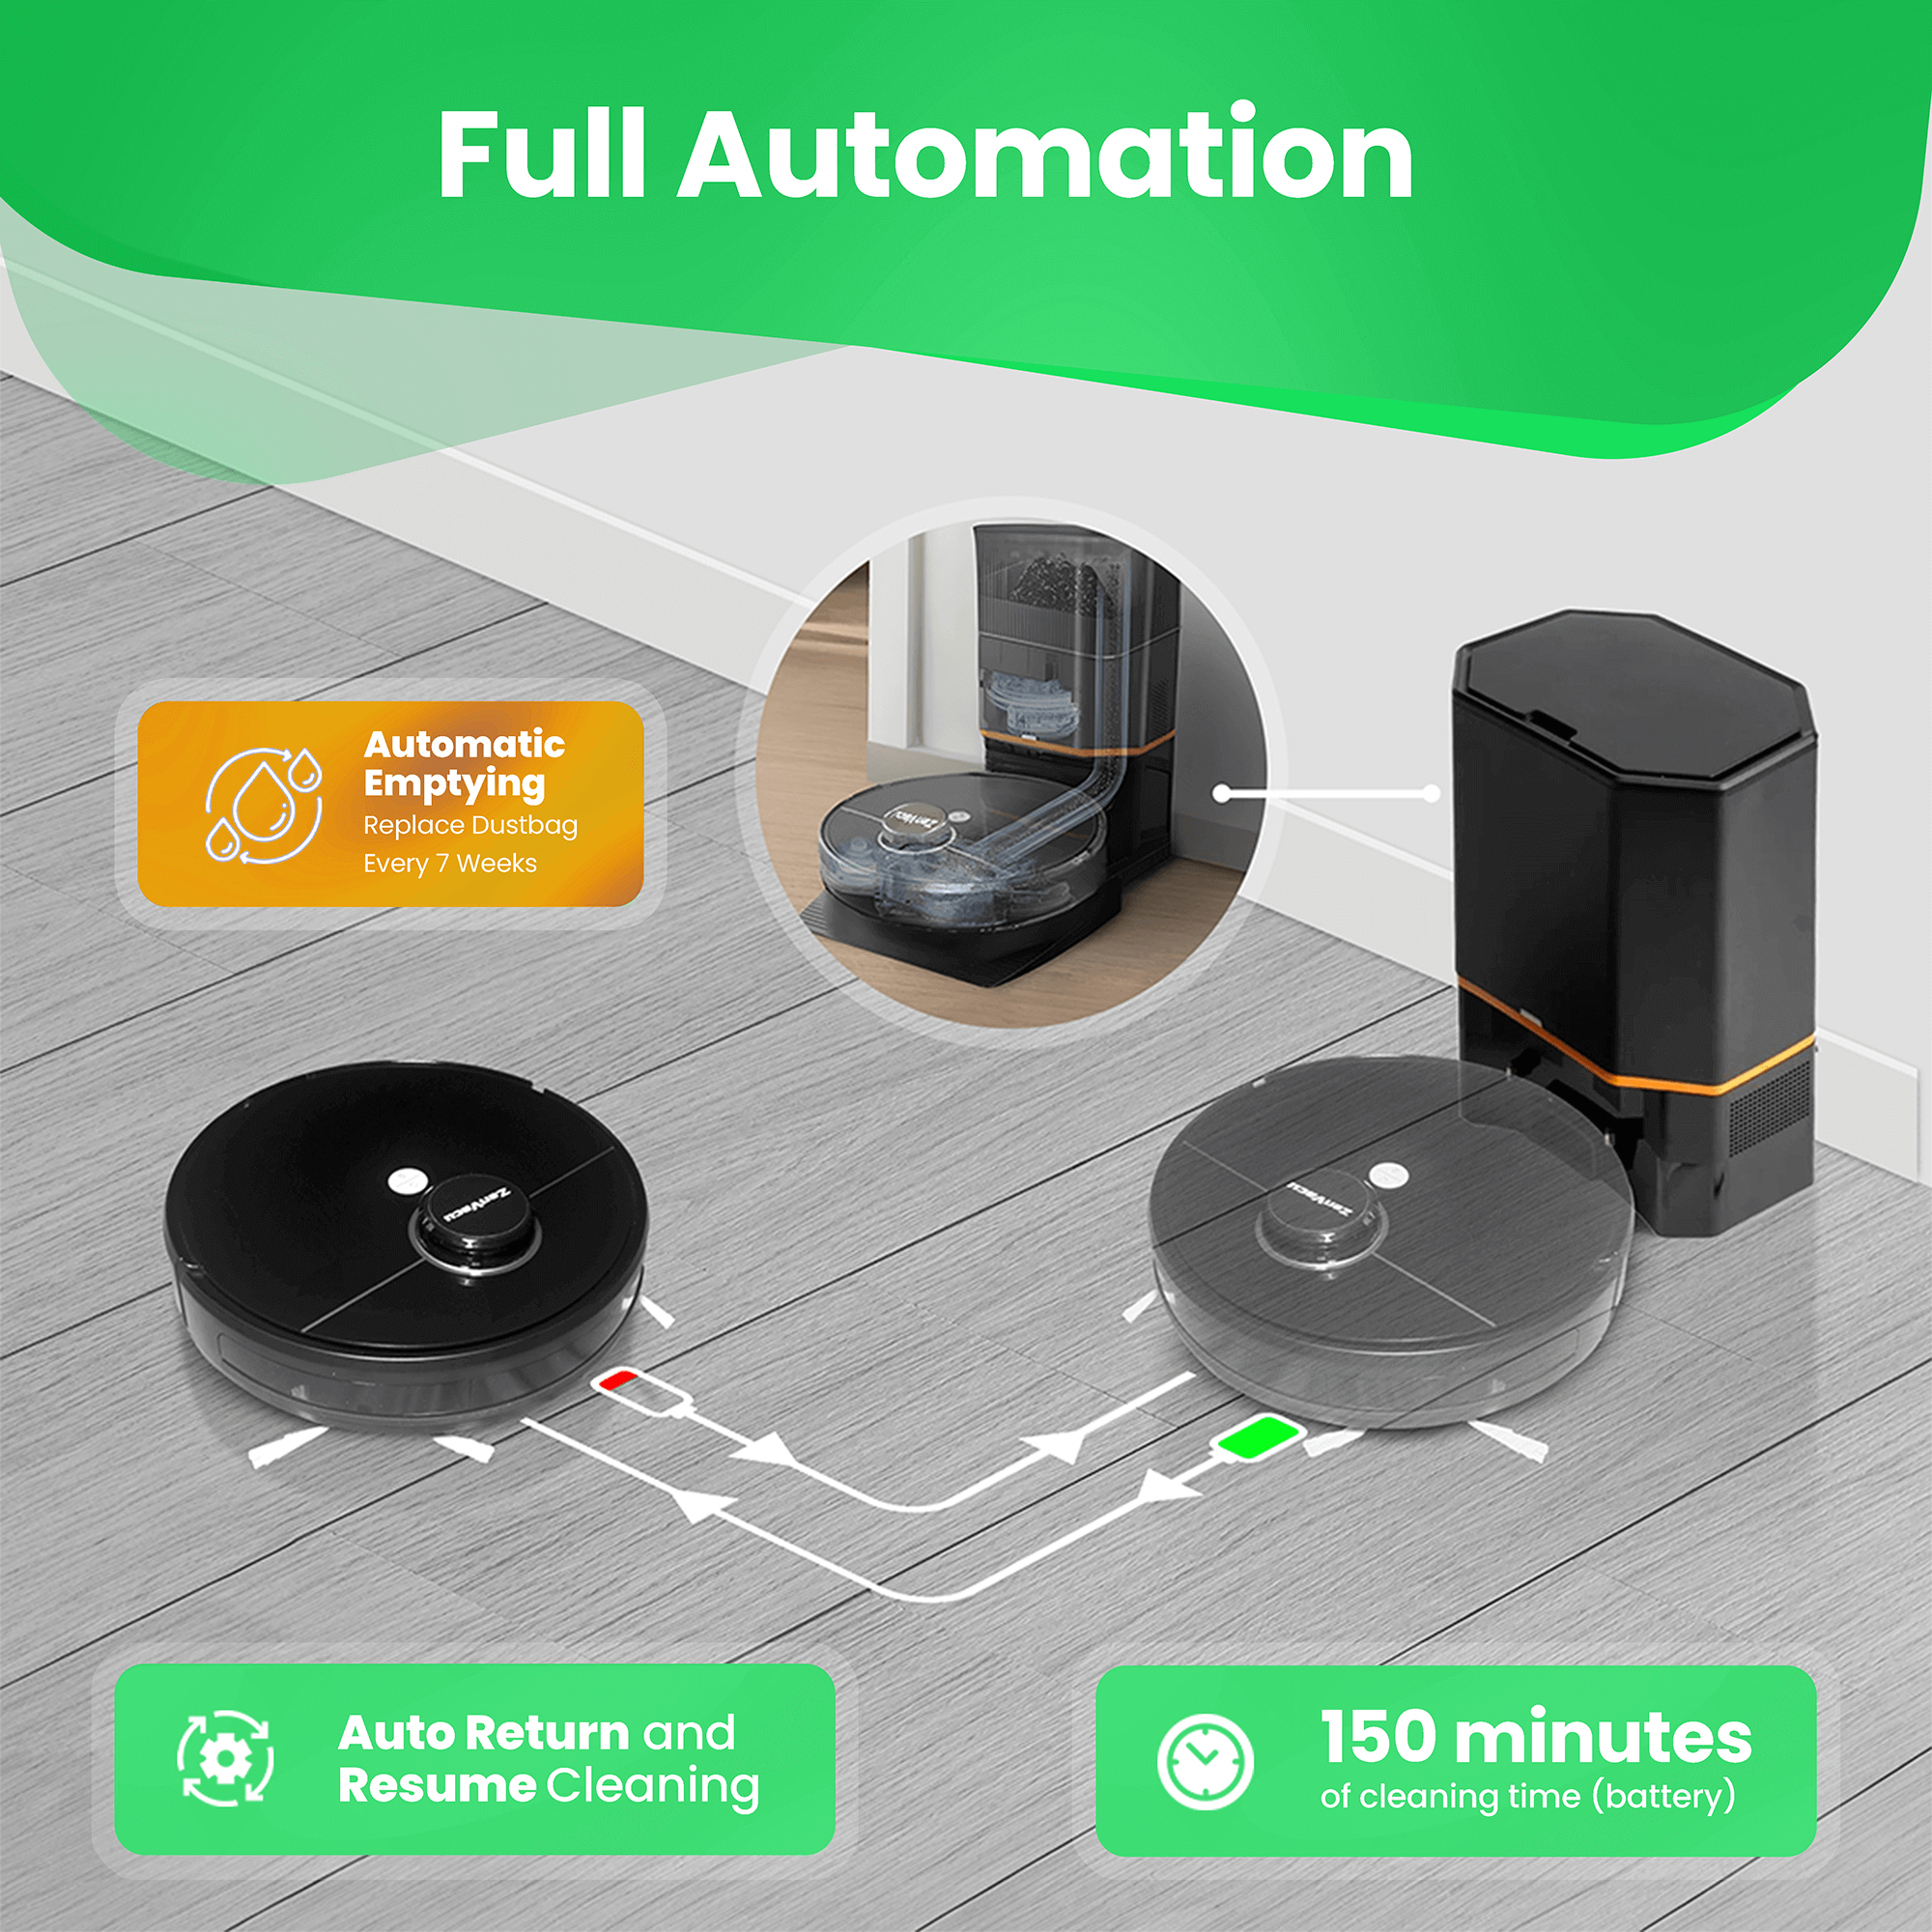 Complete Automation with ZenVacu G8 Pro featuring a self-emptying station, 150-minute battery life, and automatic return to the charging station with smart AI technology